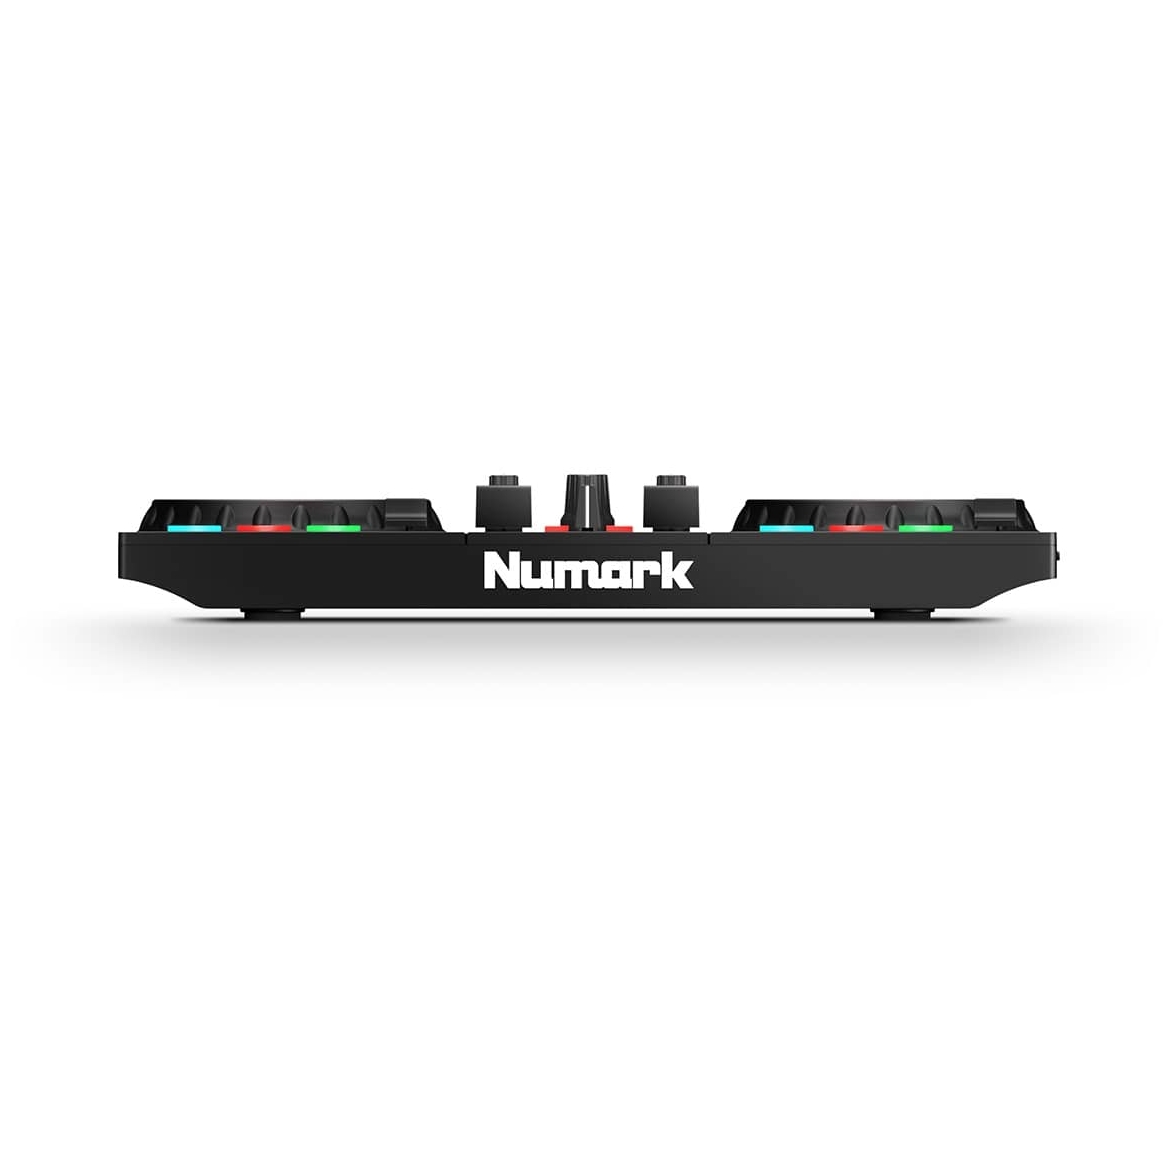 Numark Party Mix MKII B-Ware